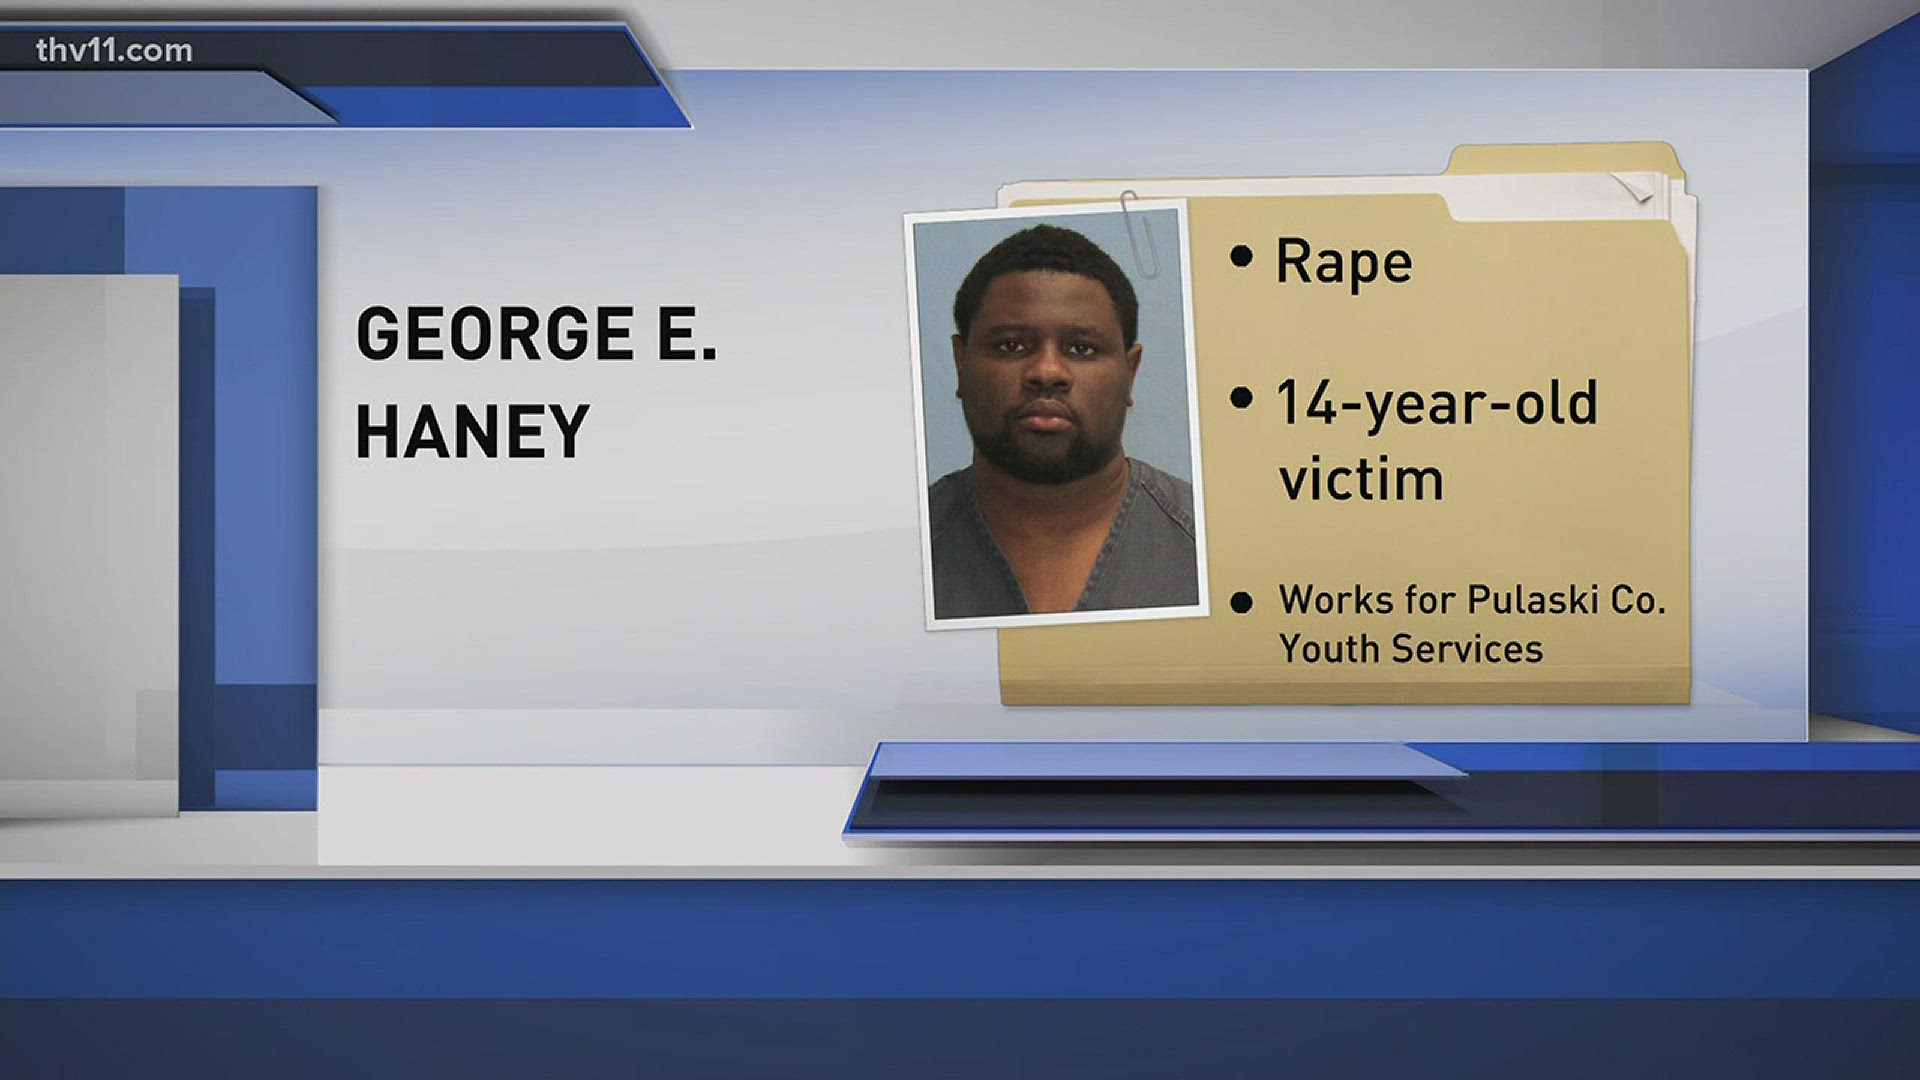 A man was arrested for rape late on the night of Nov. 10.